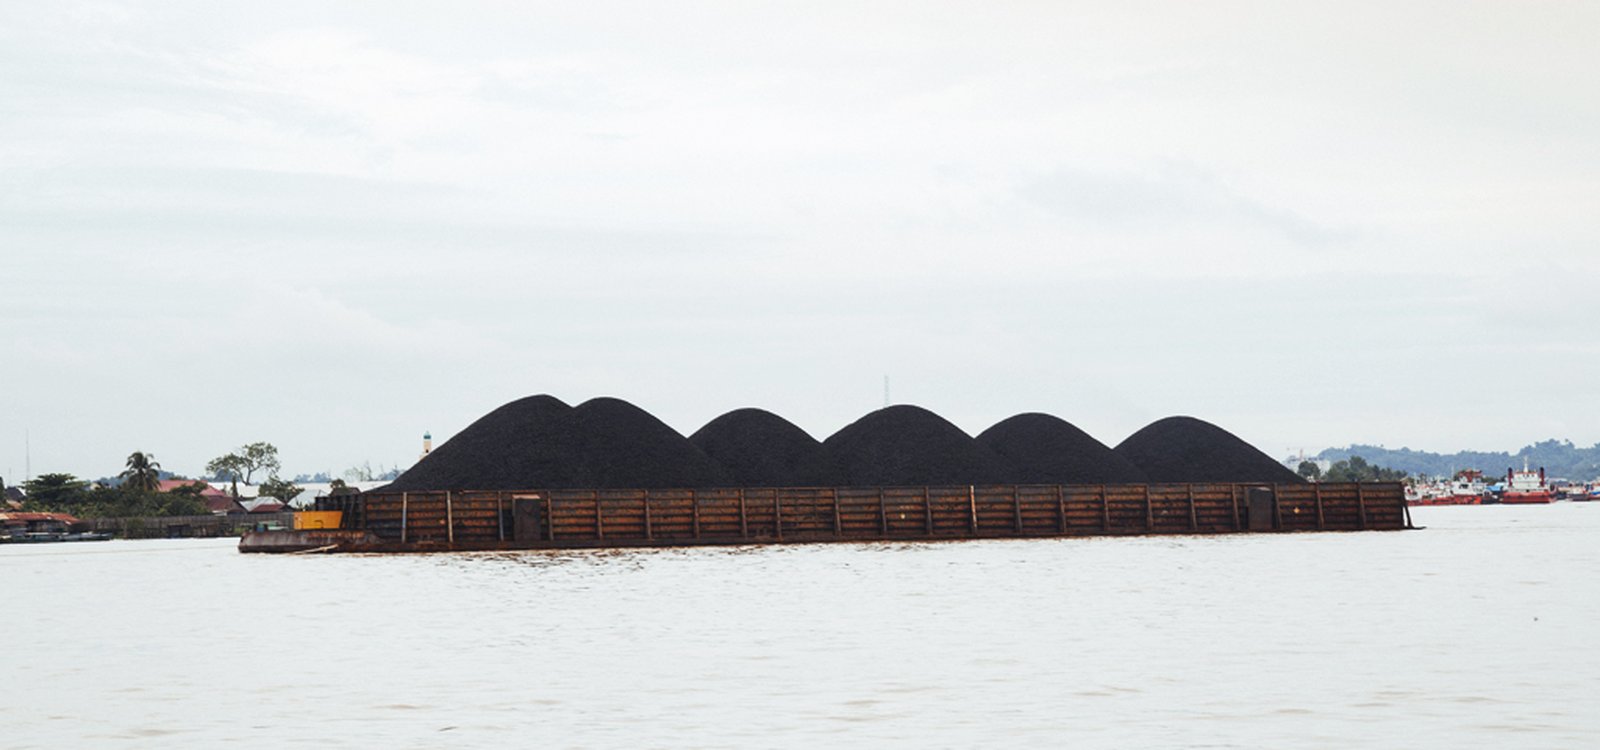 Coal from East Kalimantan is shipped to barges in the Indian Ocean and serves markets in China, India, South Korea, Japan, Taiwan and Surabaya, Indonesia's second-largest city.